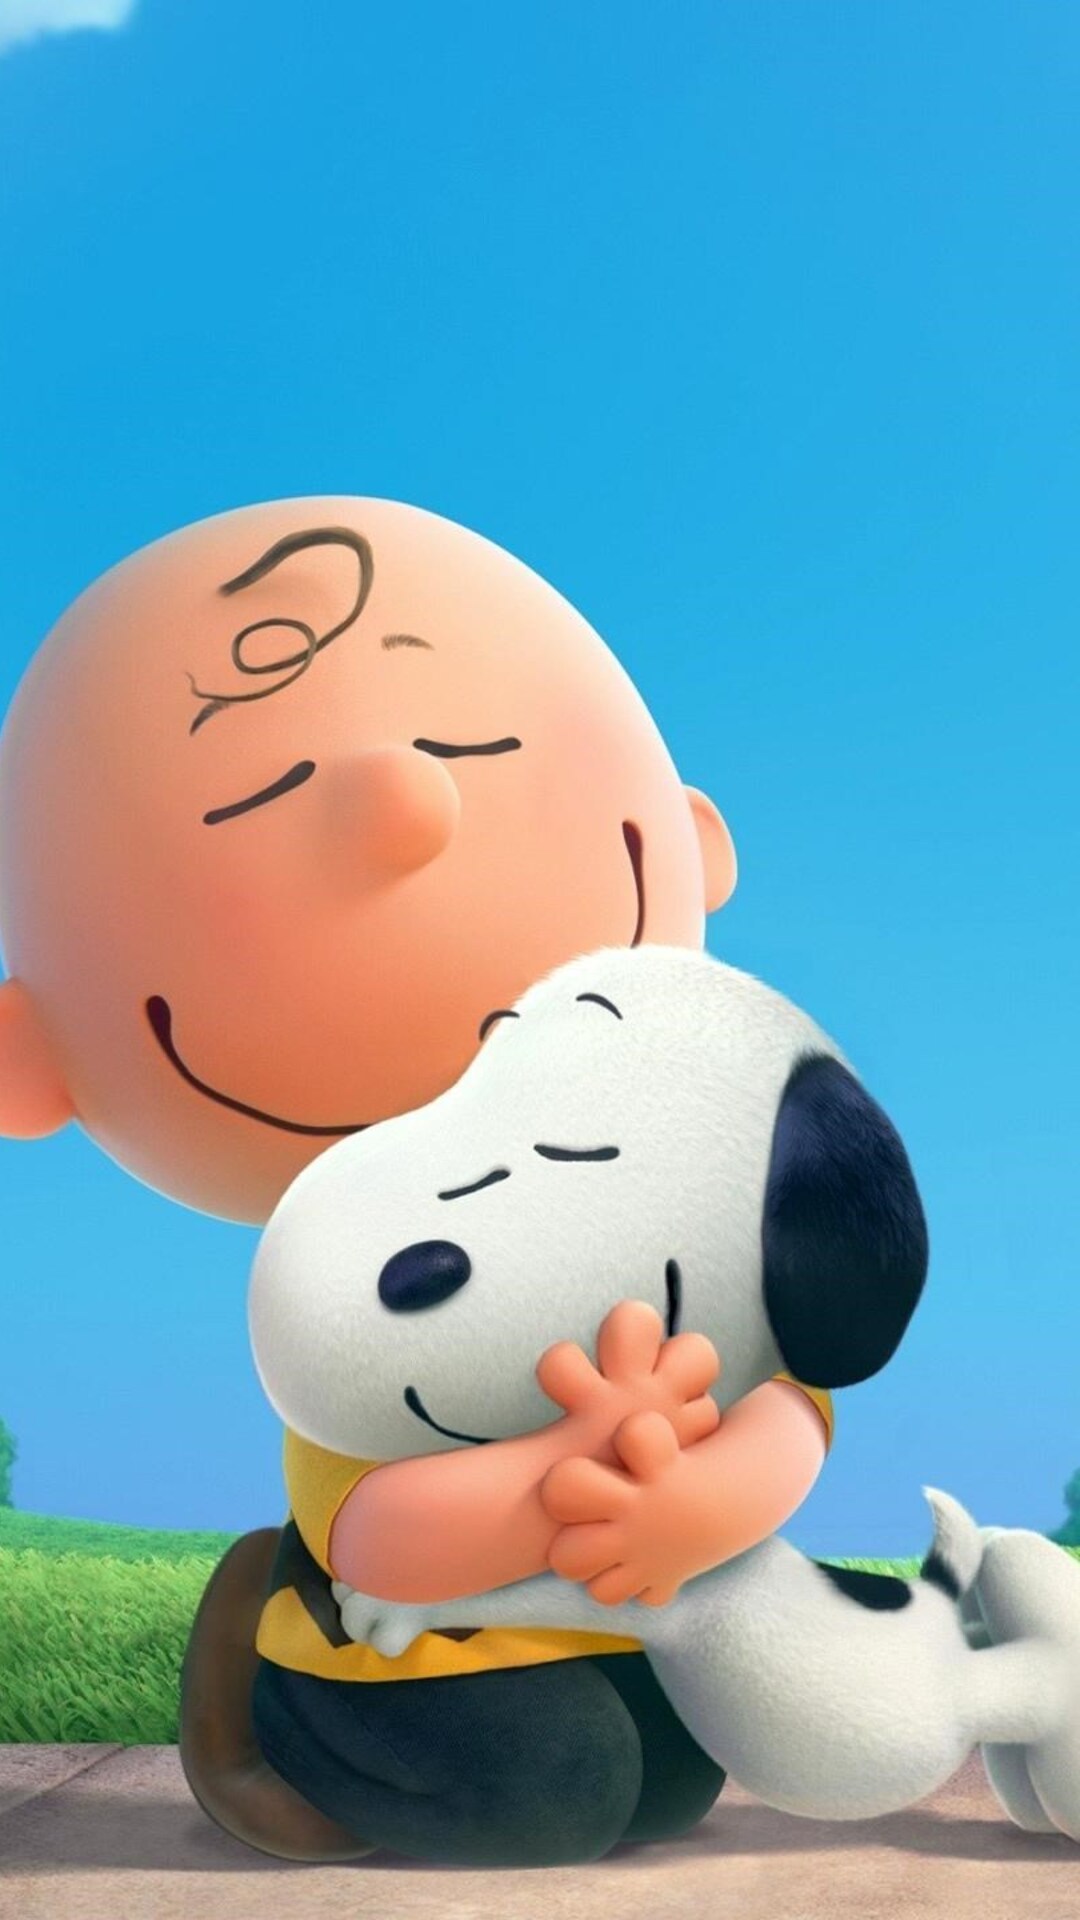 1080x1920 The Peanuts Charlie Brown Snoppy Iphone 7,6s,6 Plus, Pixel xl  ,One Plus 3,3t,5 HD 4k Wallpapers, Images, Backgrounds, Photos and Pictures